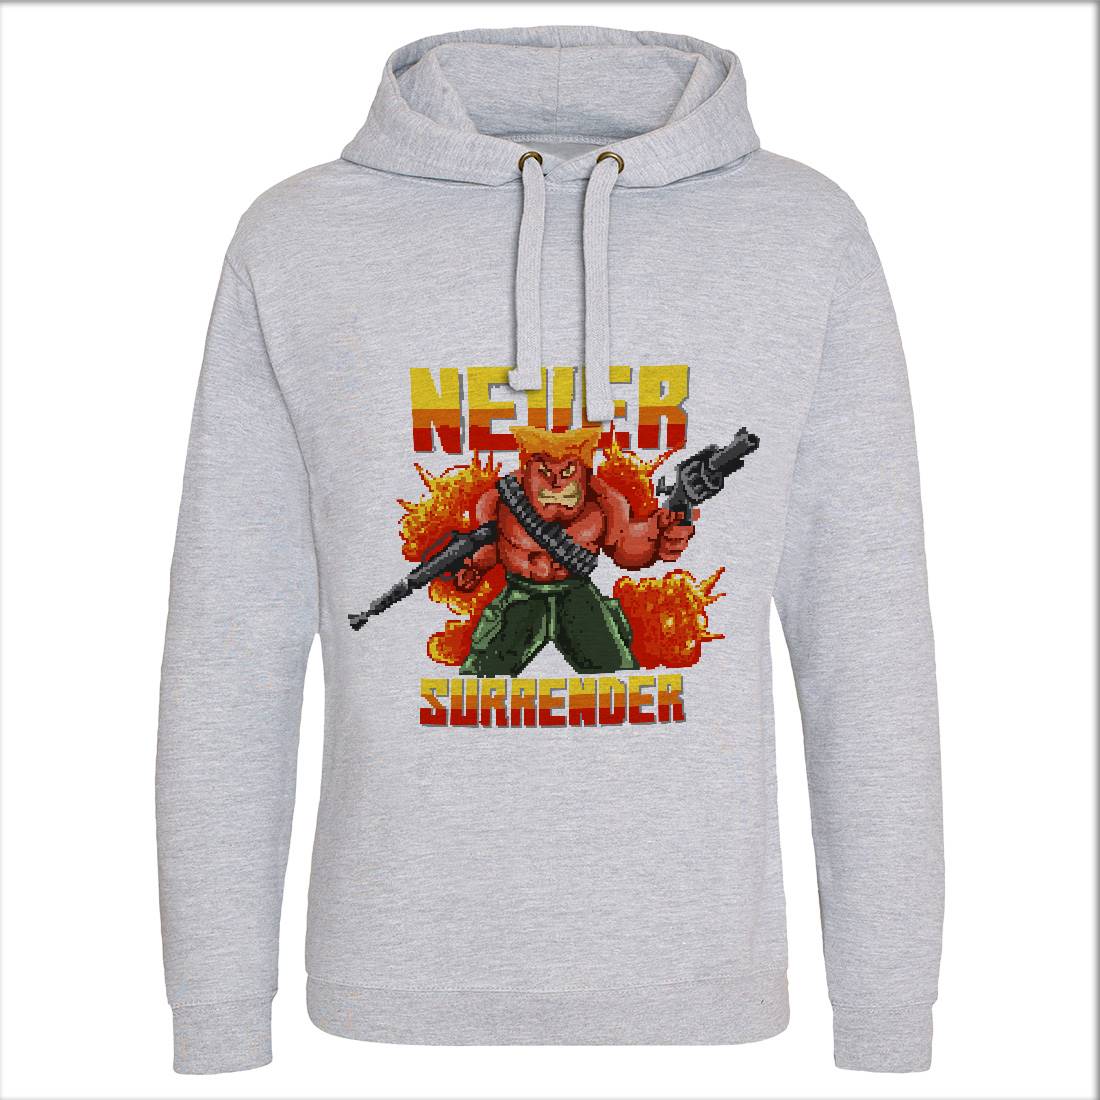 Never Surrender Mens Hoodie Without Pocket Army B939